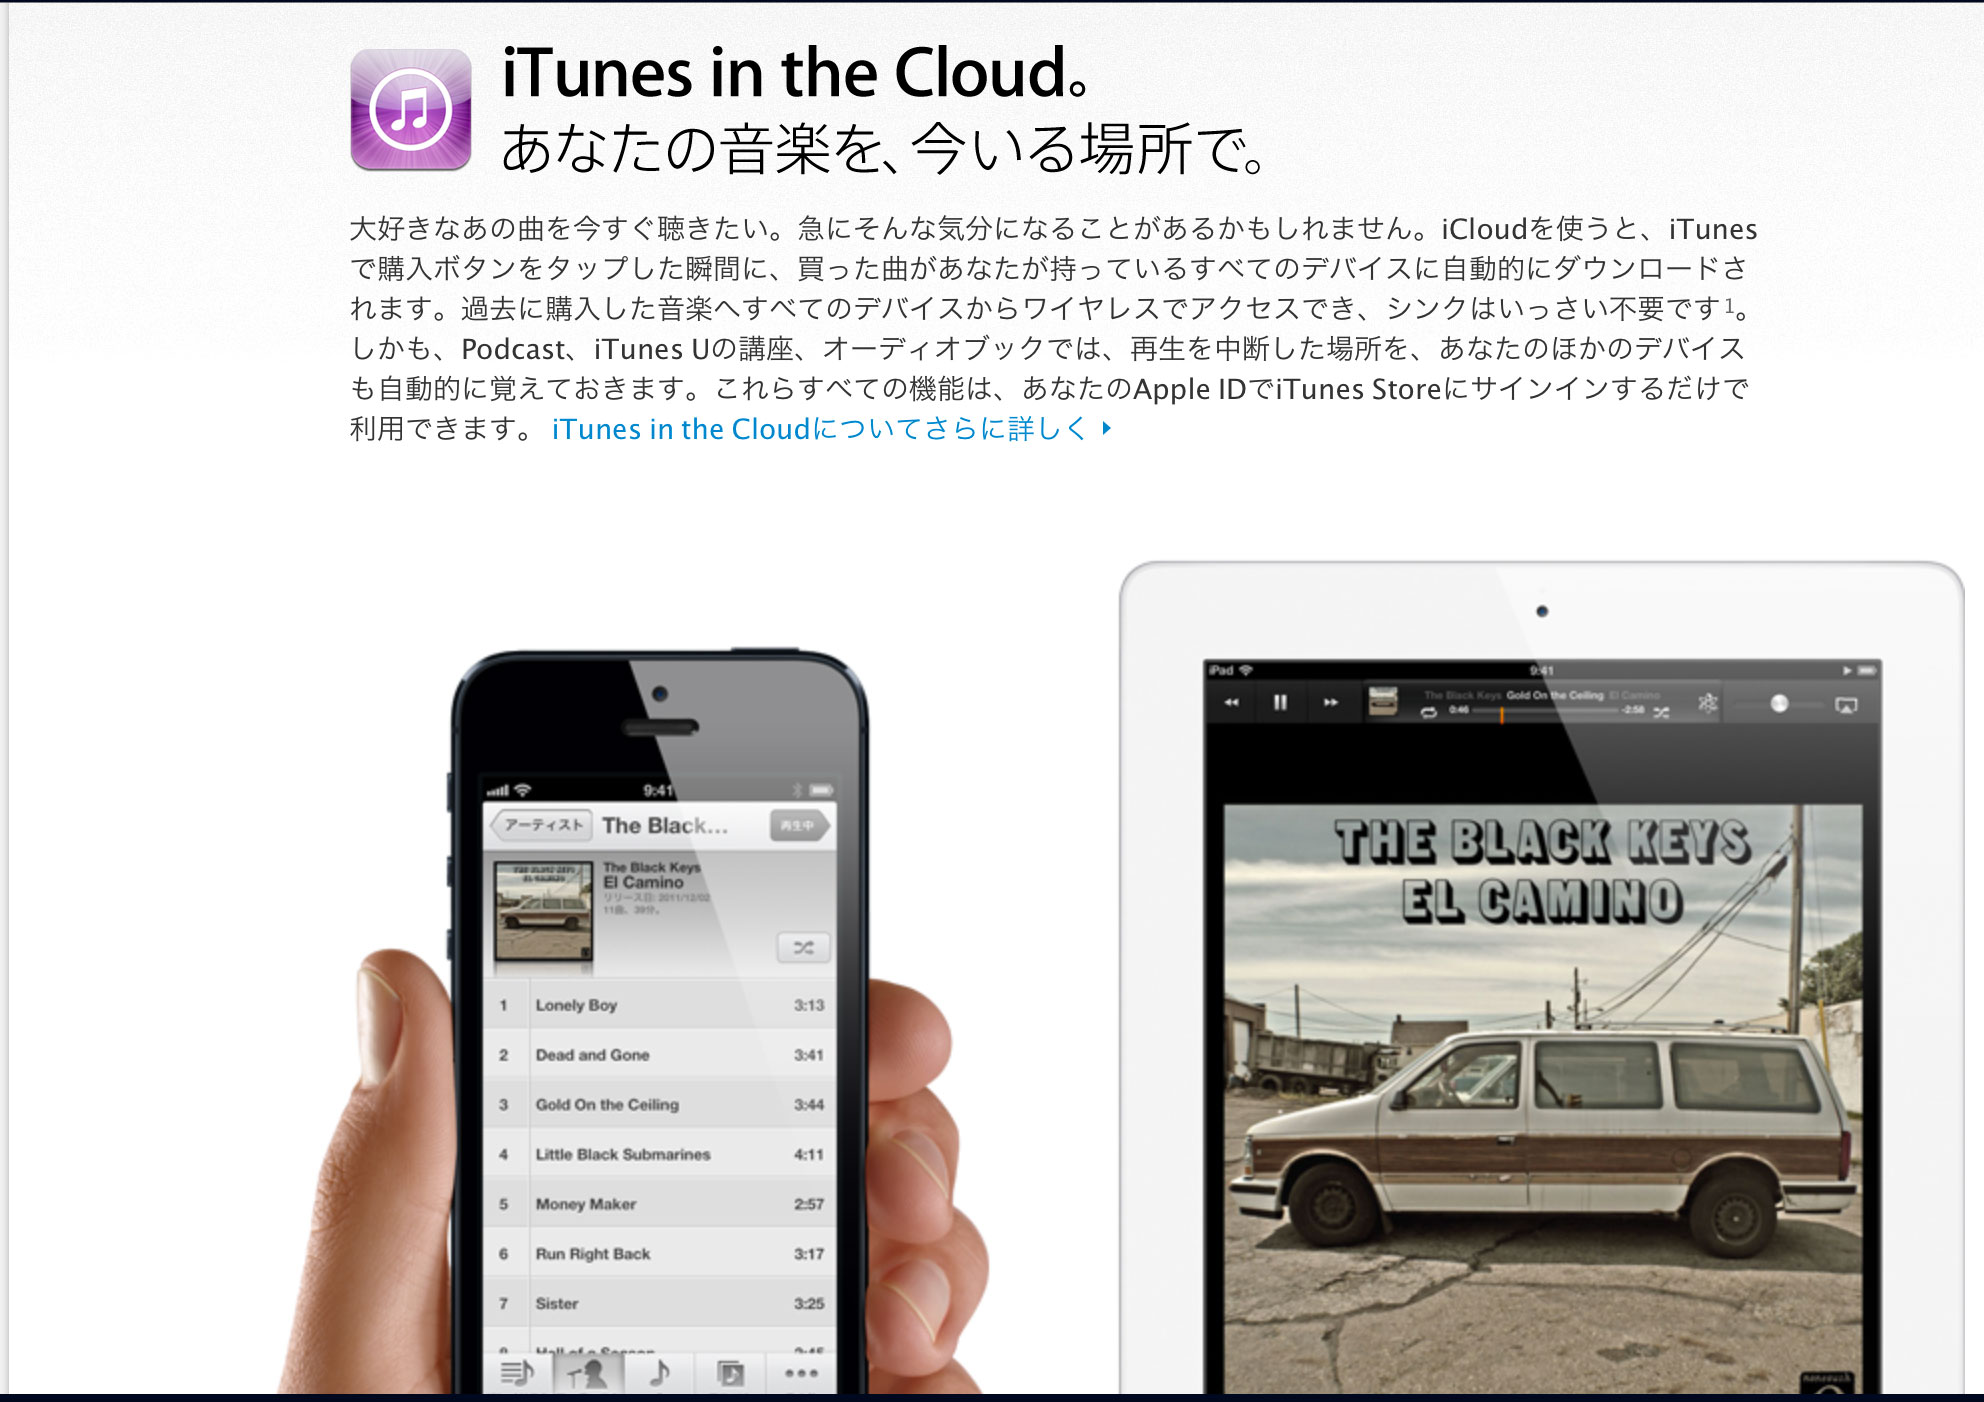 iTunes in the cloud